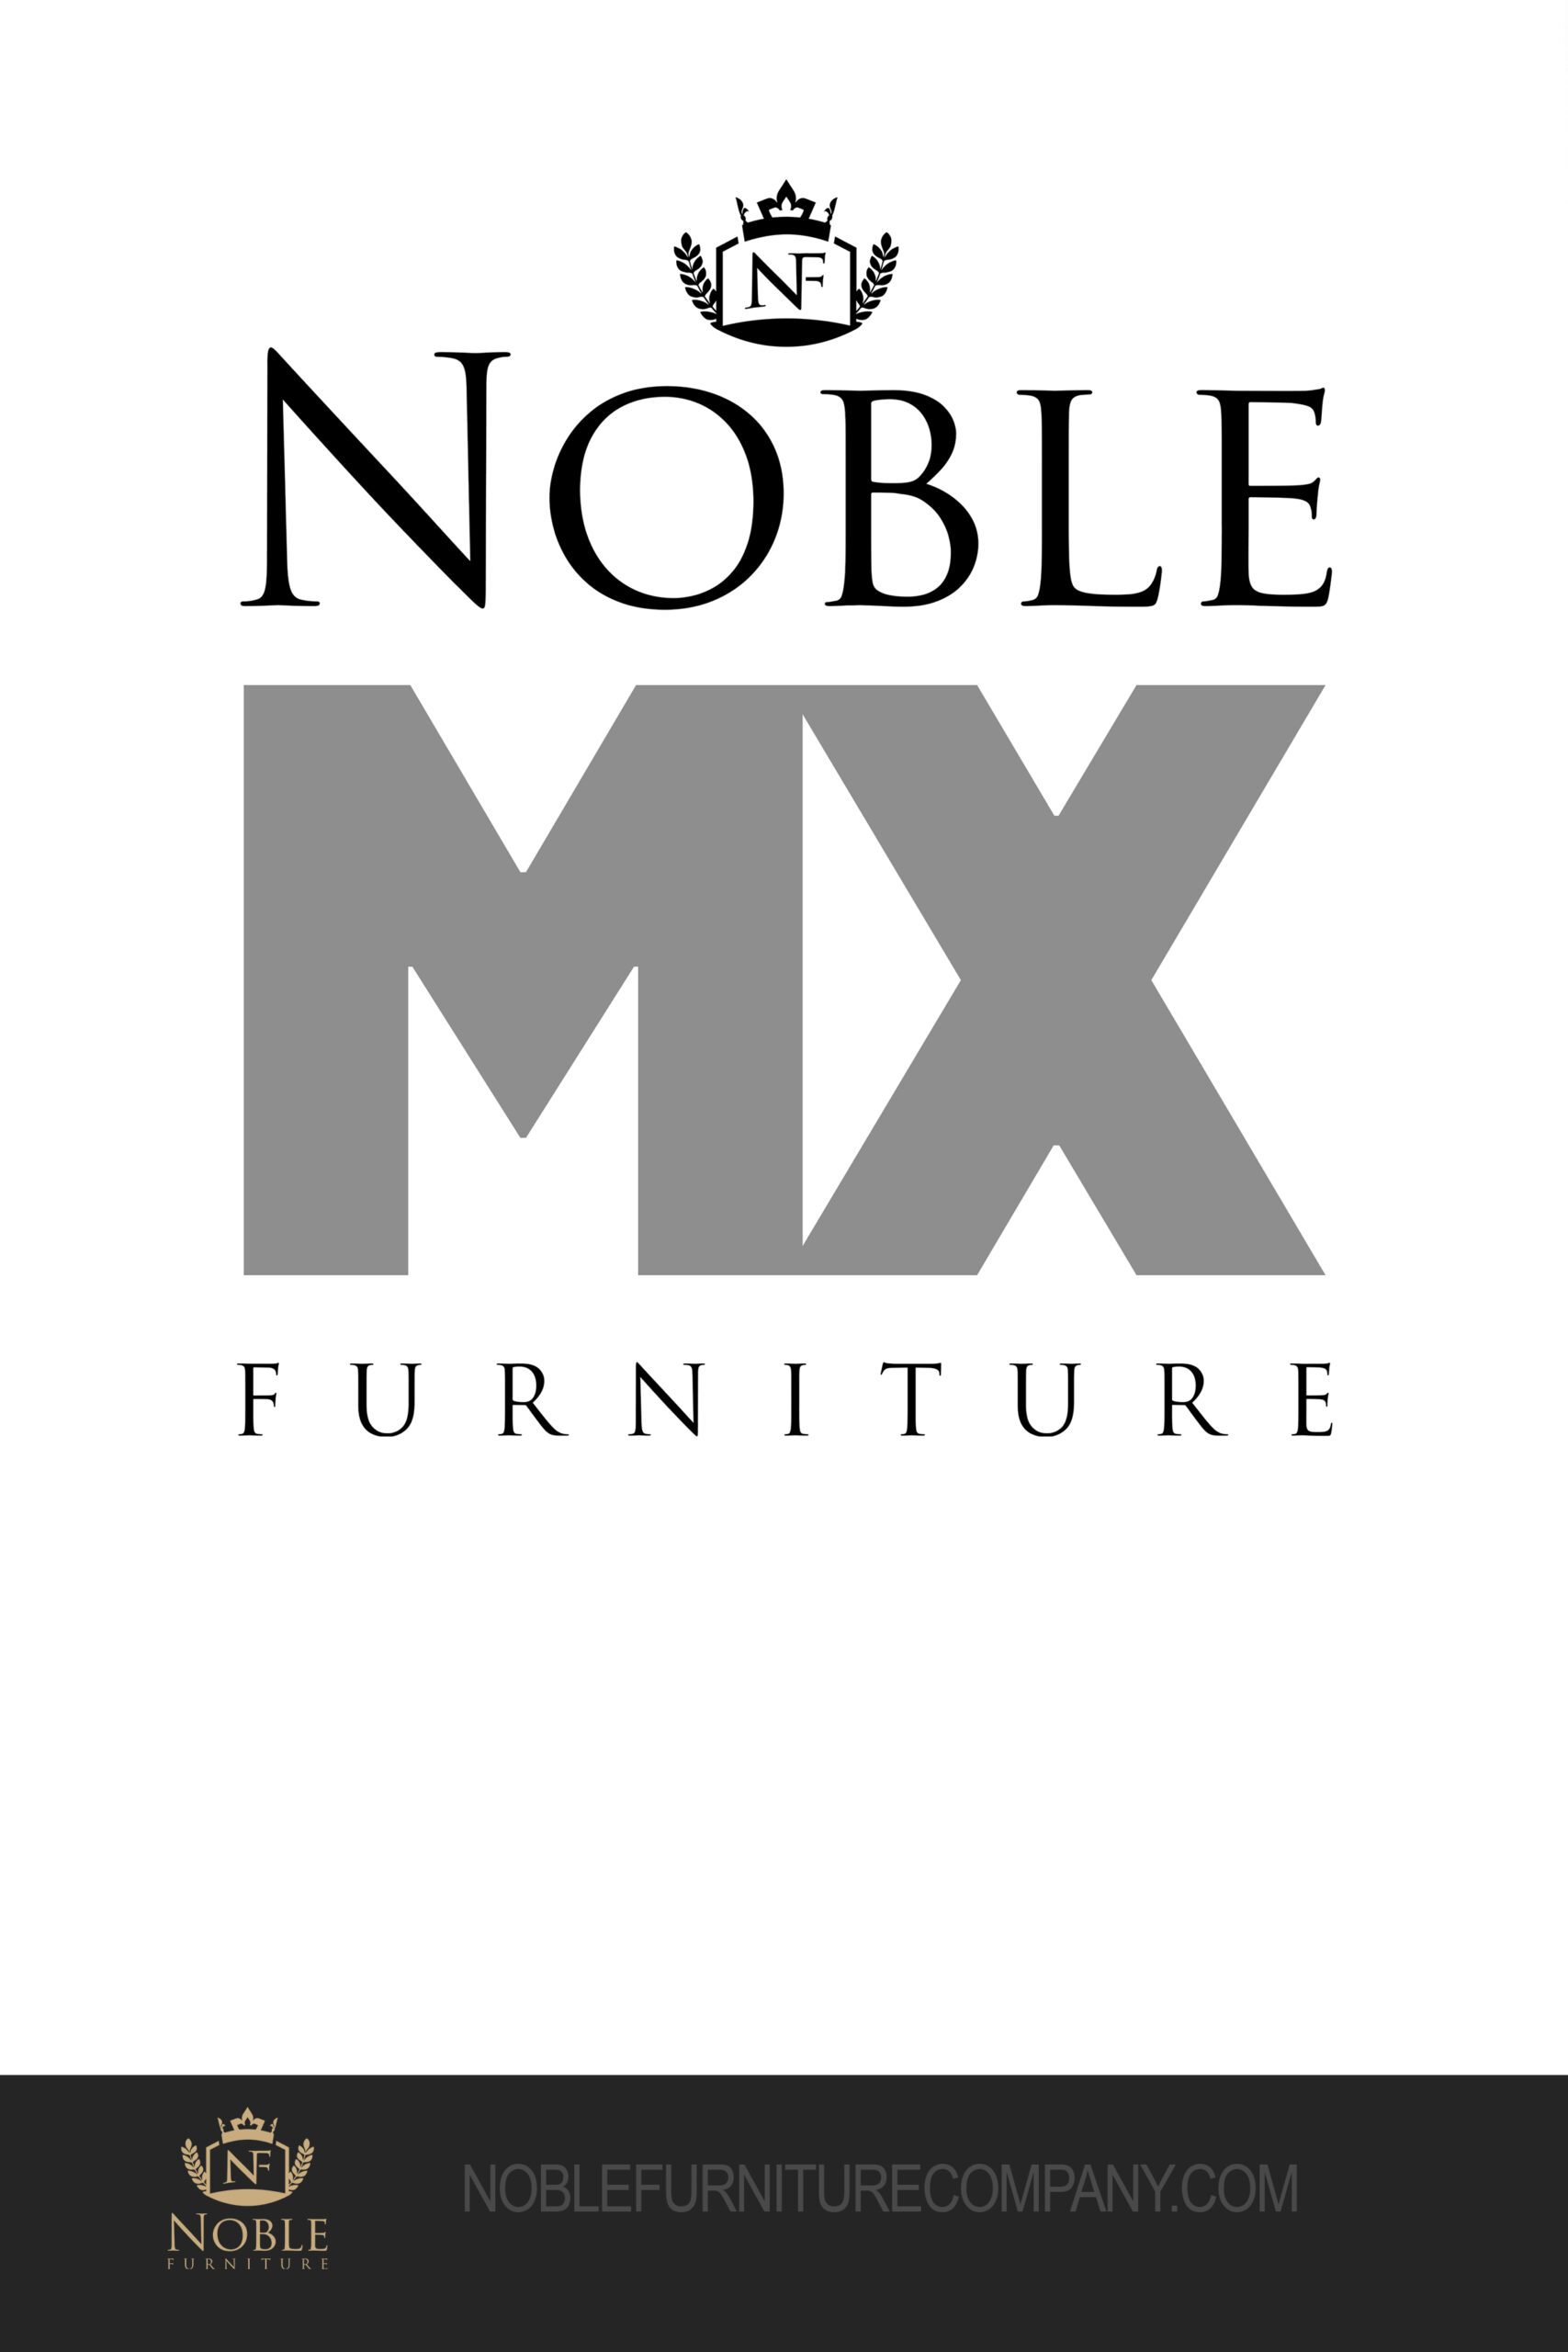 Noble MX Furniture - Made in Mexico